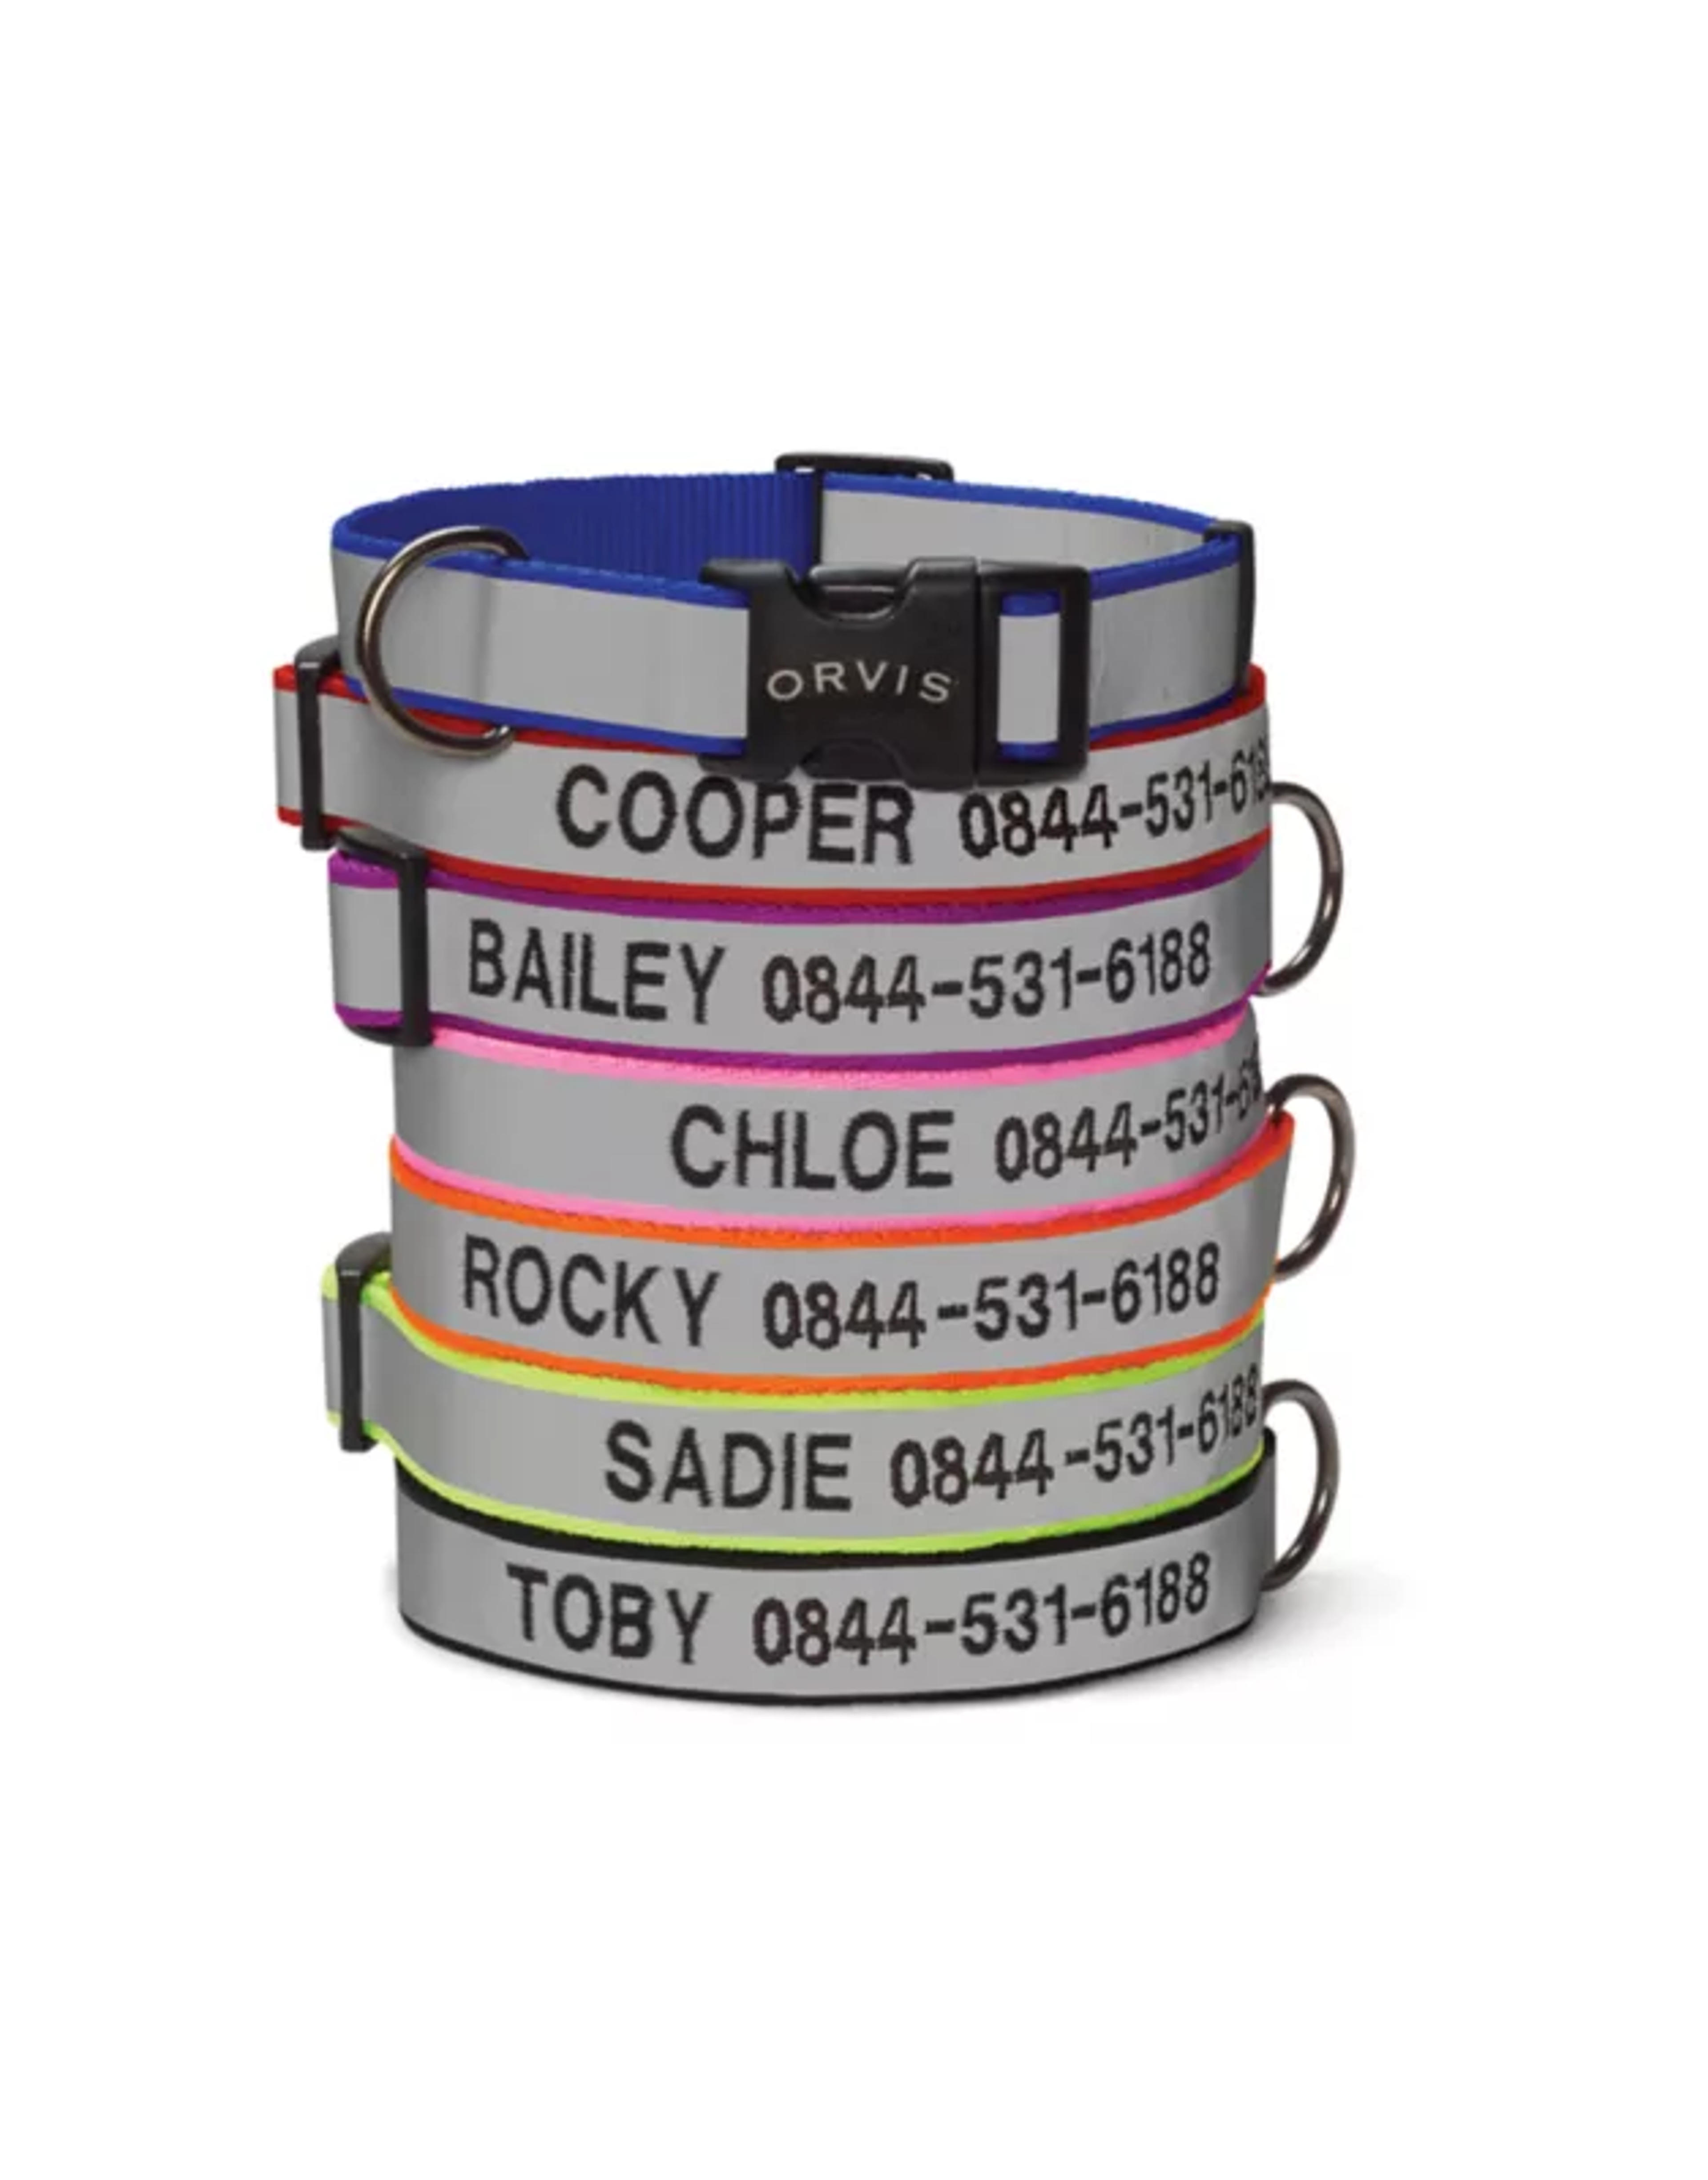 Personalized Reflective Dog Collar | Orvis